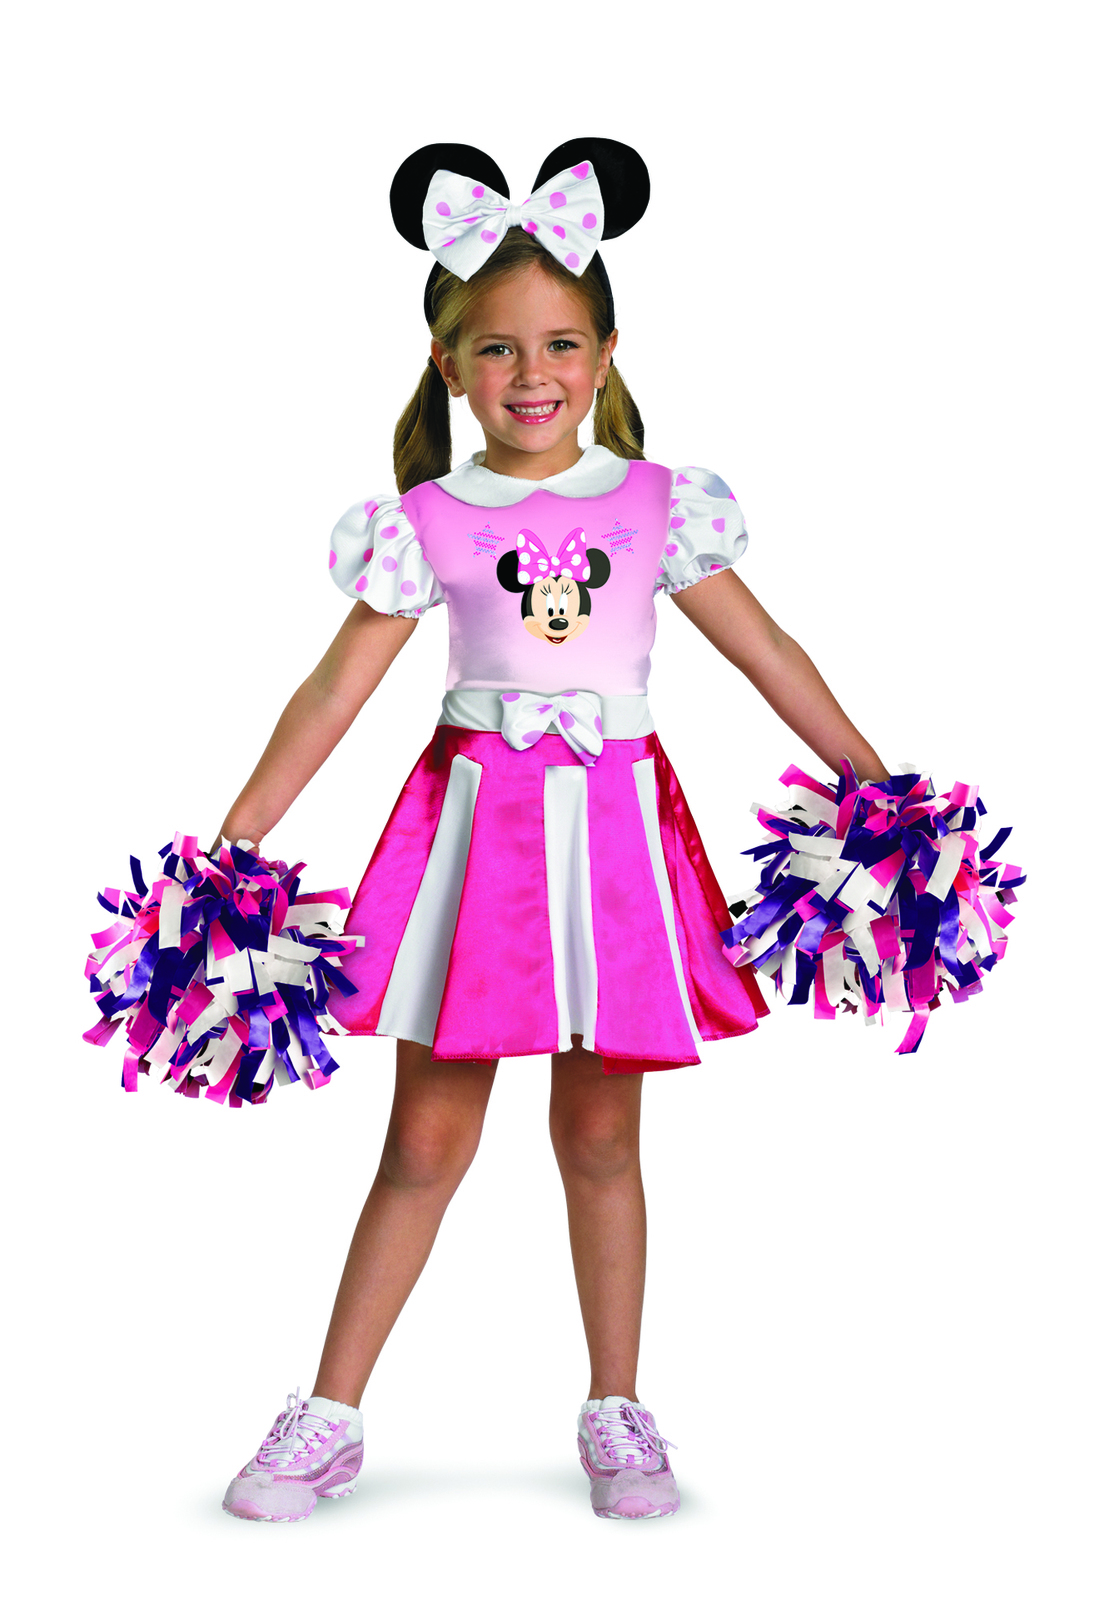 Primary image for Minnie Mouse Cheerleader Toddler Costume - Toddler Medium